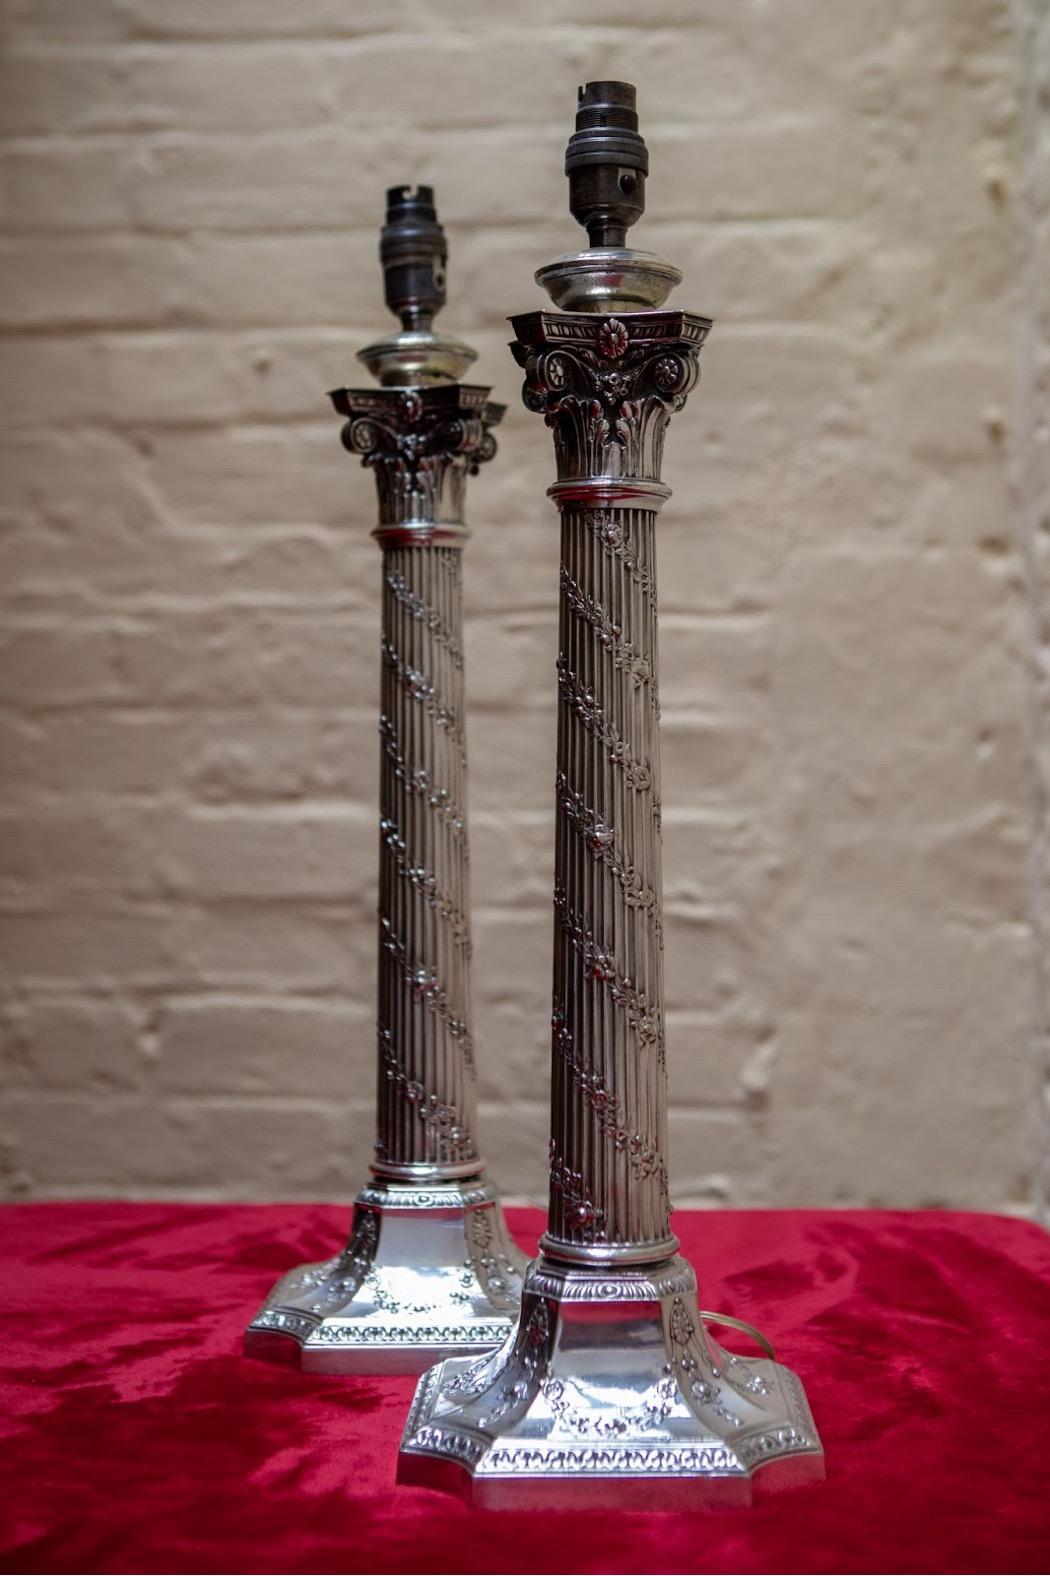 Pair of Edwardian table lamps converted from oil lamps, possibly by the manufacturer. The lamps will be re-wired and PAT tested as part of the price once destination country is known. For their age, they are in excellent condition.